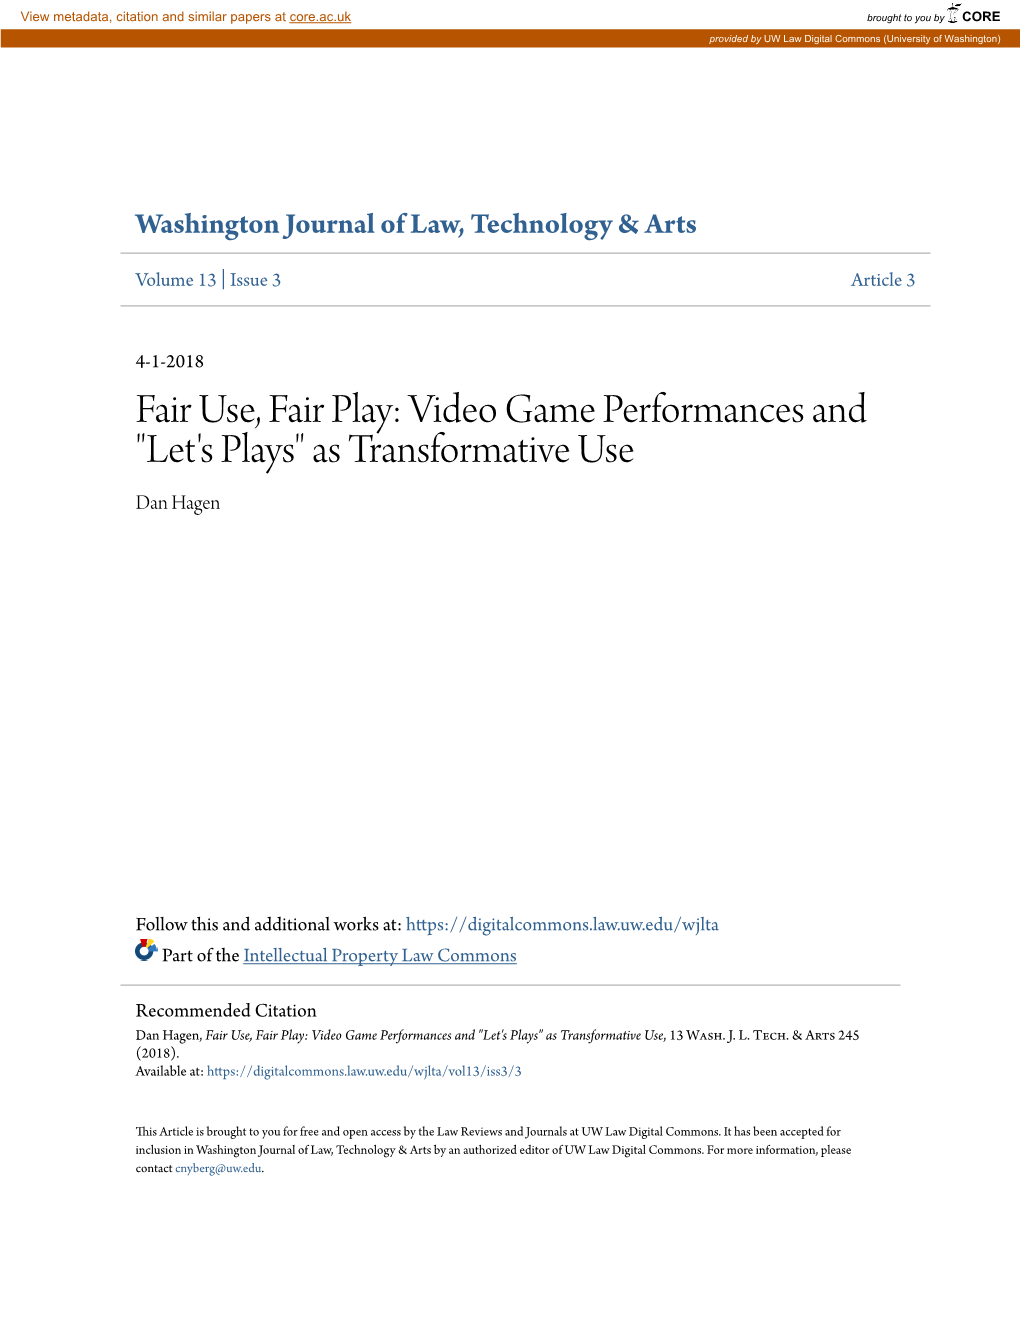 Fair Use, Fair Play: Video Game Performances and "Let's Plays" As Transformative Use Dan Hagen